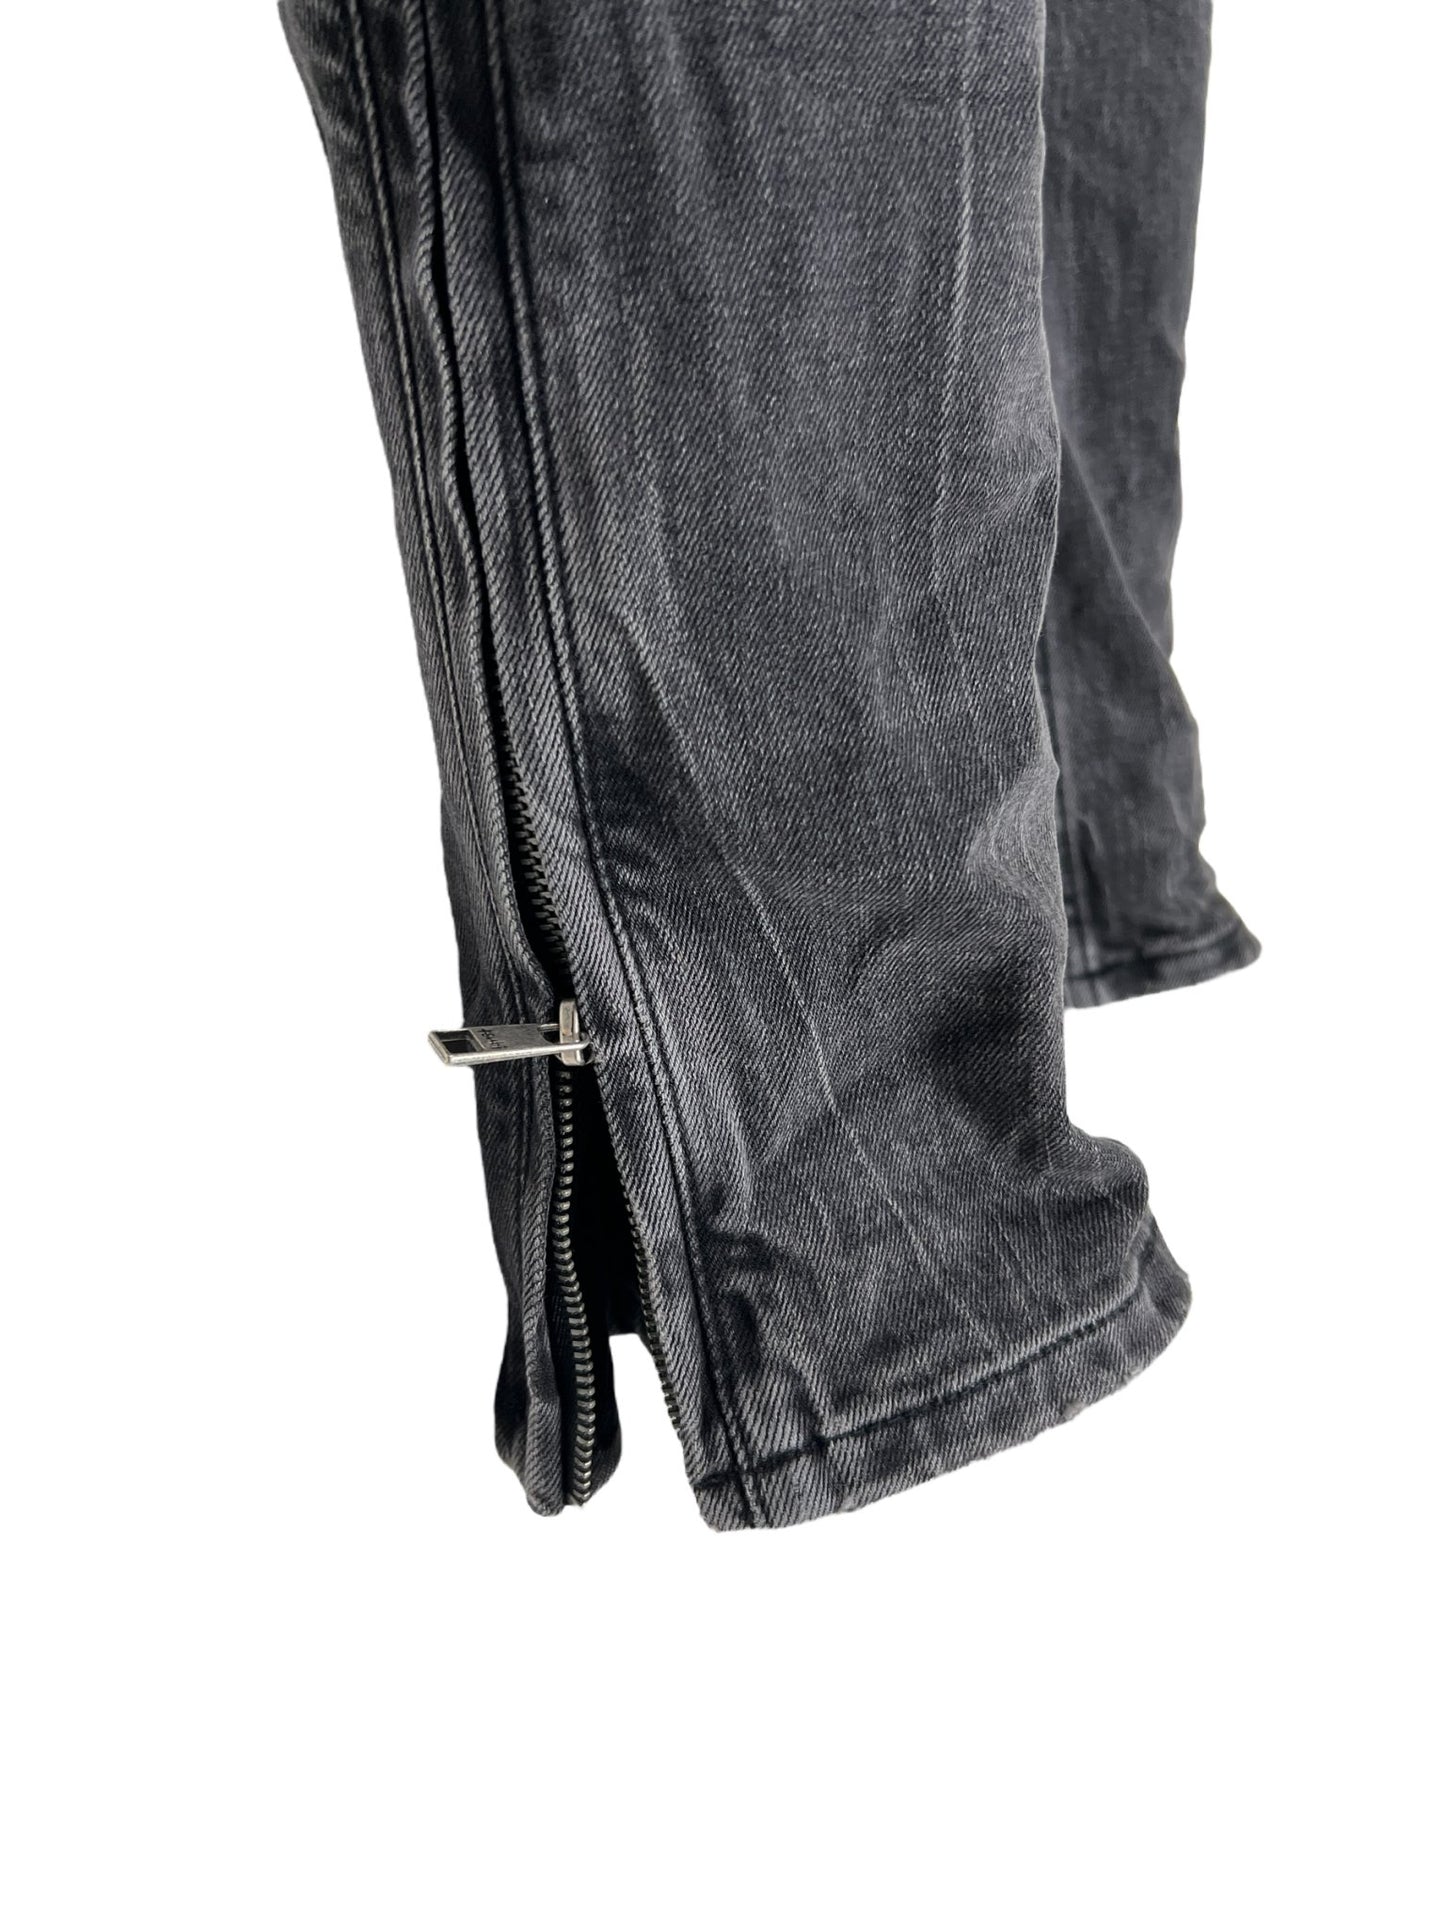 A pair of KSUBI VAN WINKLE CHAMBER BLACK jeans with zippers on the side.